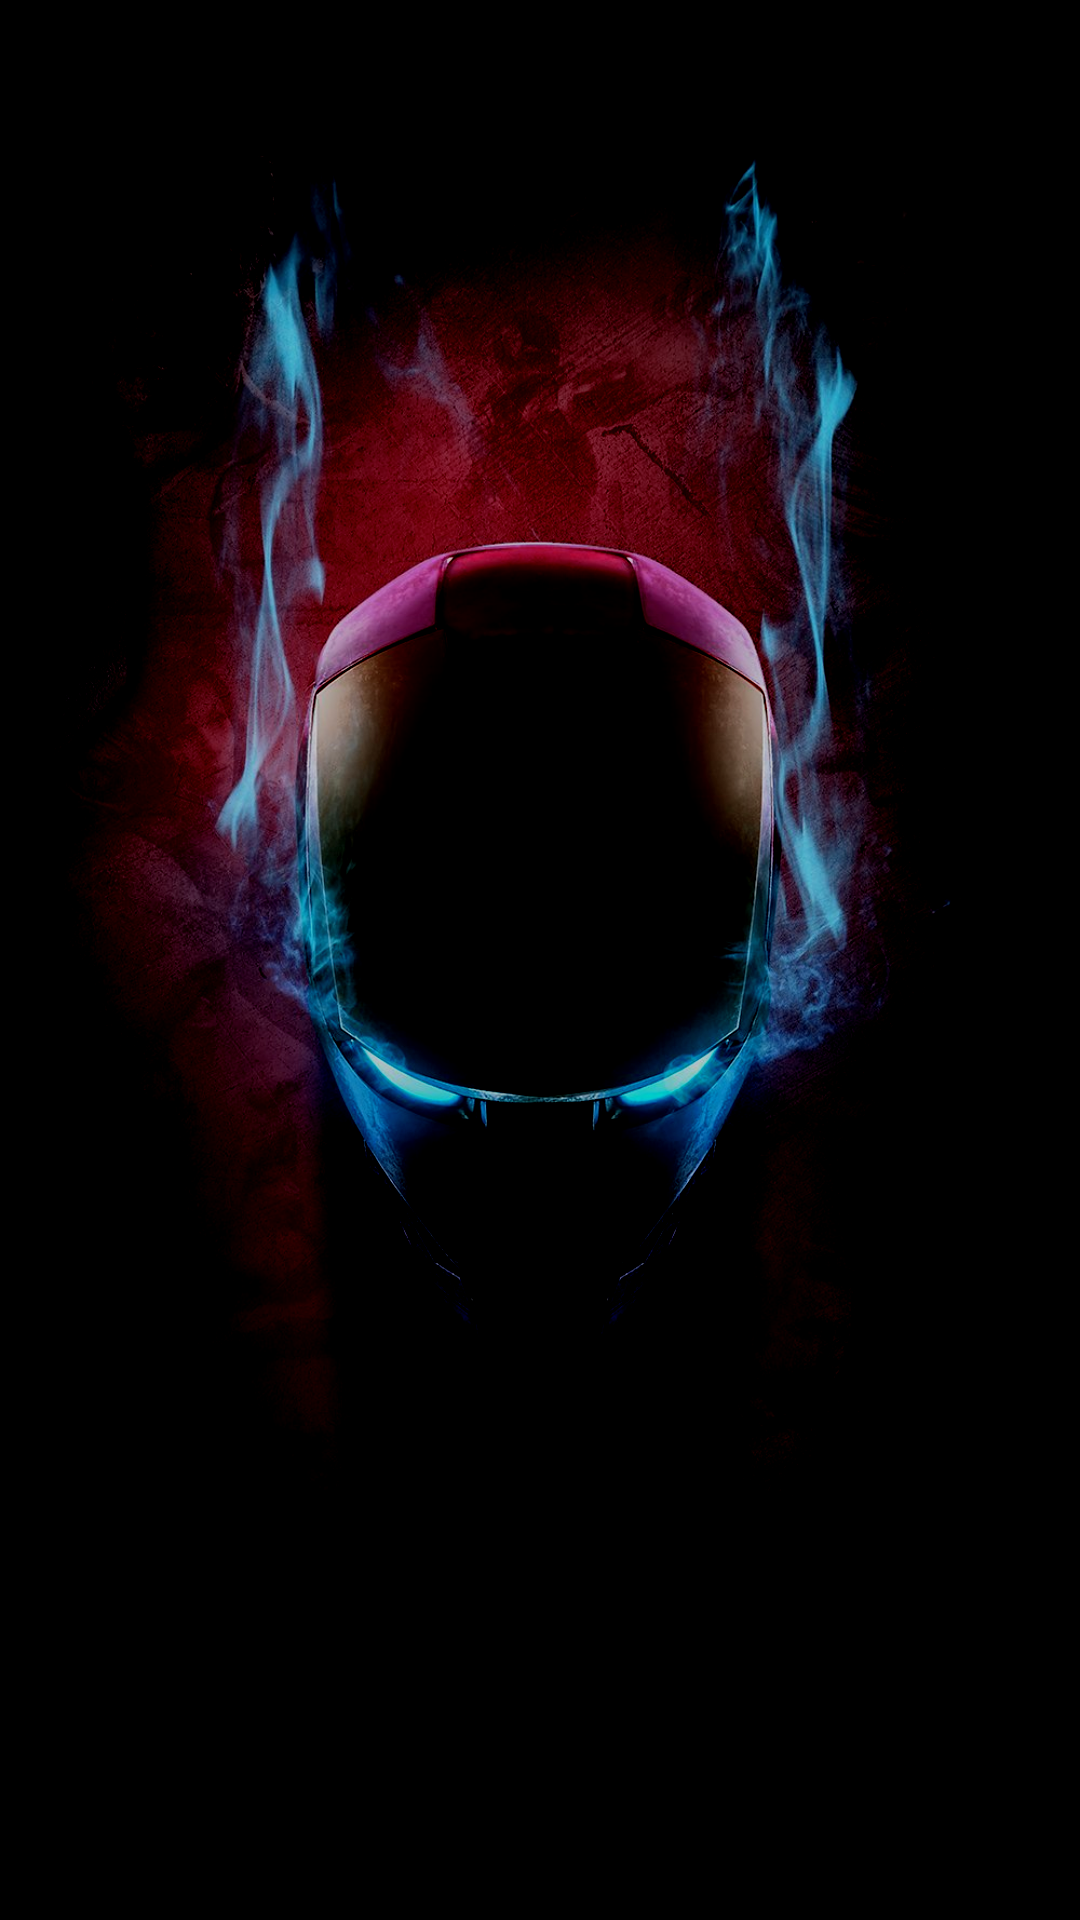 Took BossLogic's post and tried to turn it into an AMOLED